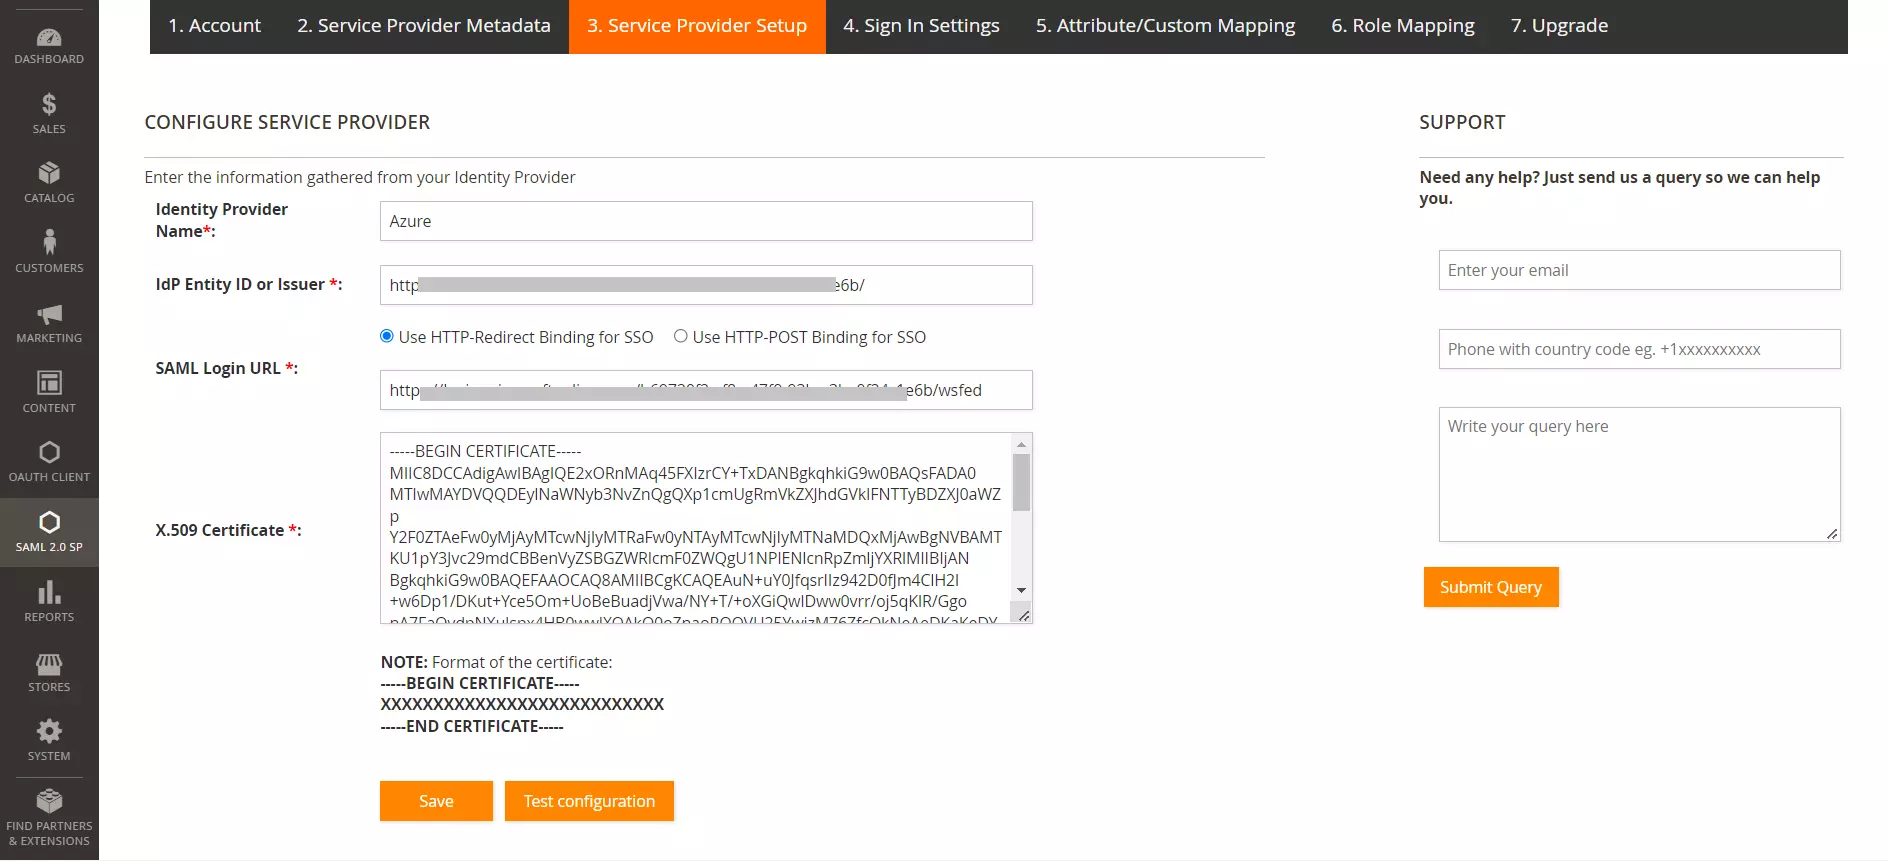 Absorb LMS Magento SSO - Absorb LMS Single Sign-On(SSO) Login in Magento - federation metadata